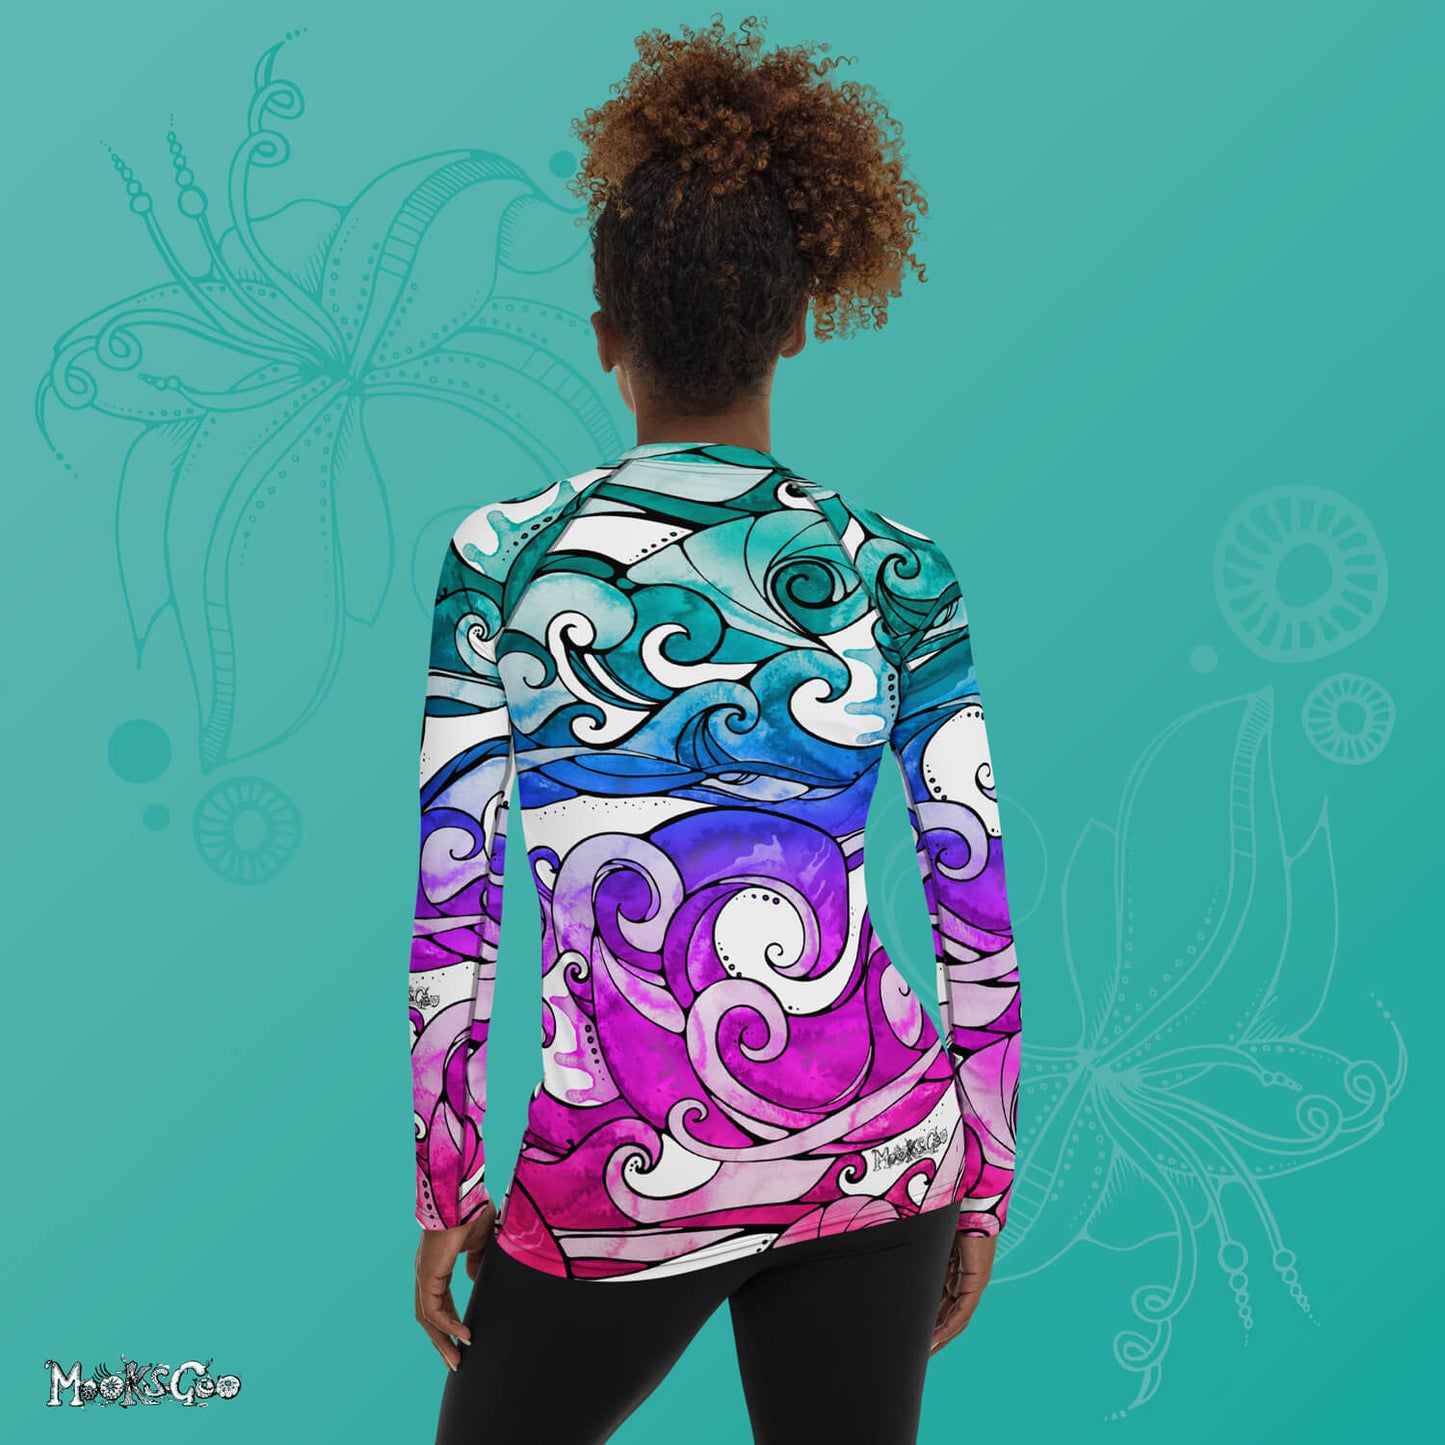 Bright rainbow wave rash guard sports vest for swimming, surfing, working out, yoga, cycling and more, model to the back. Quirky illustrated wave pattern designed by MooksGoo.